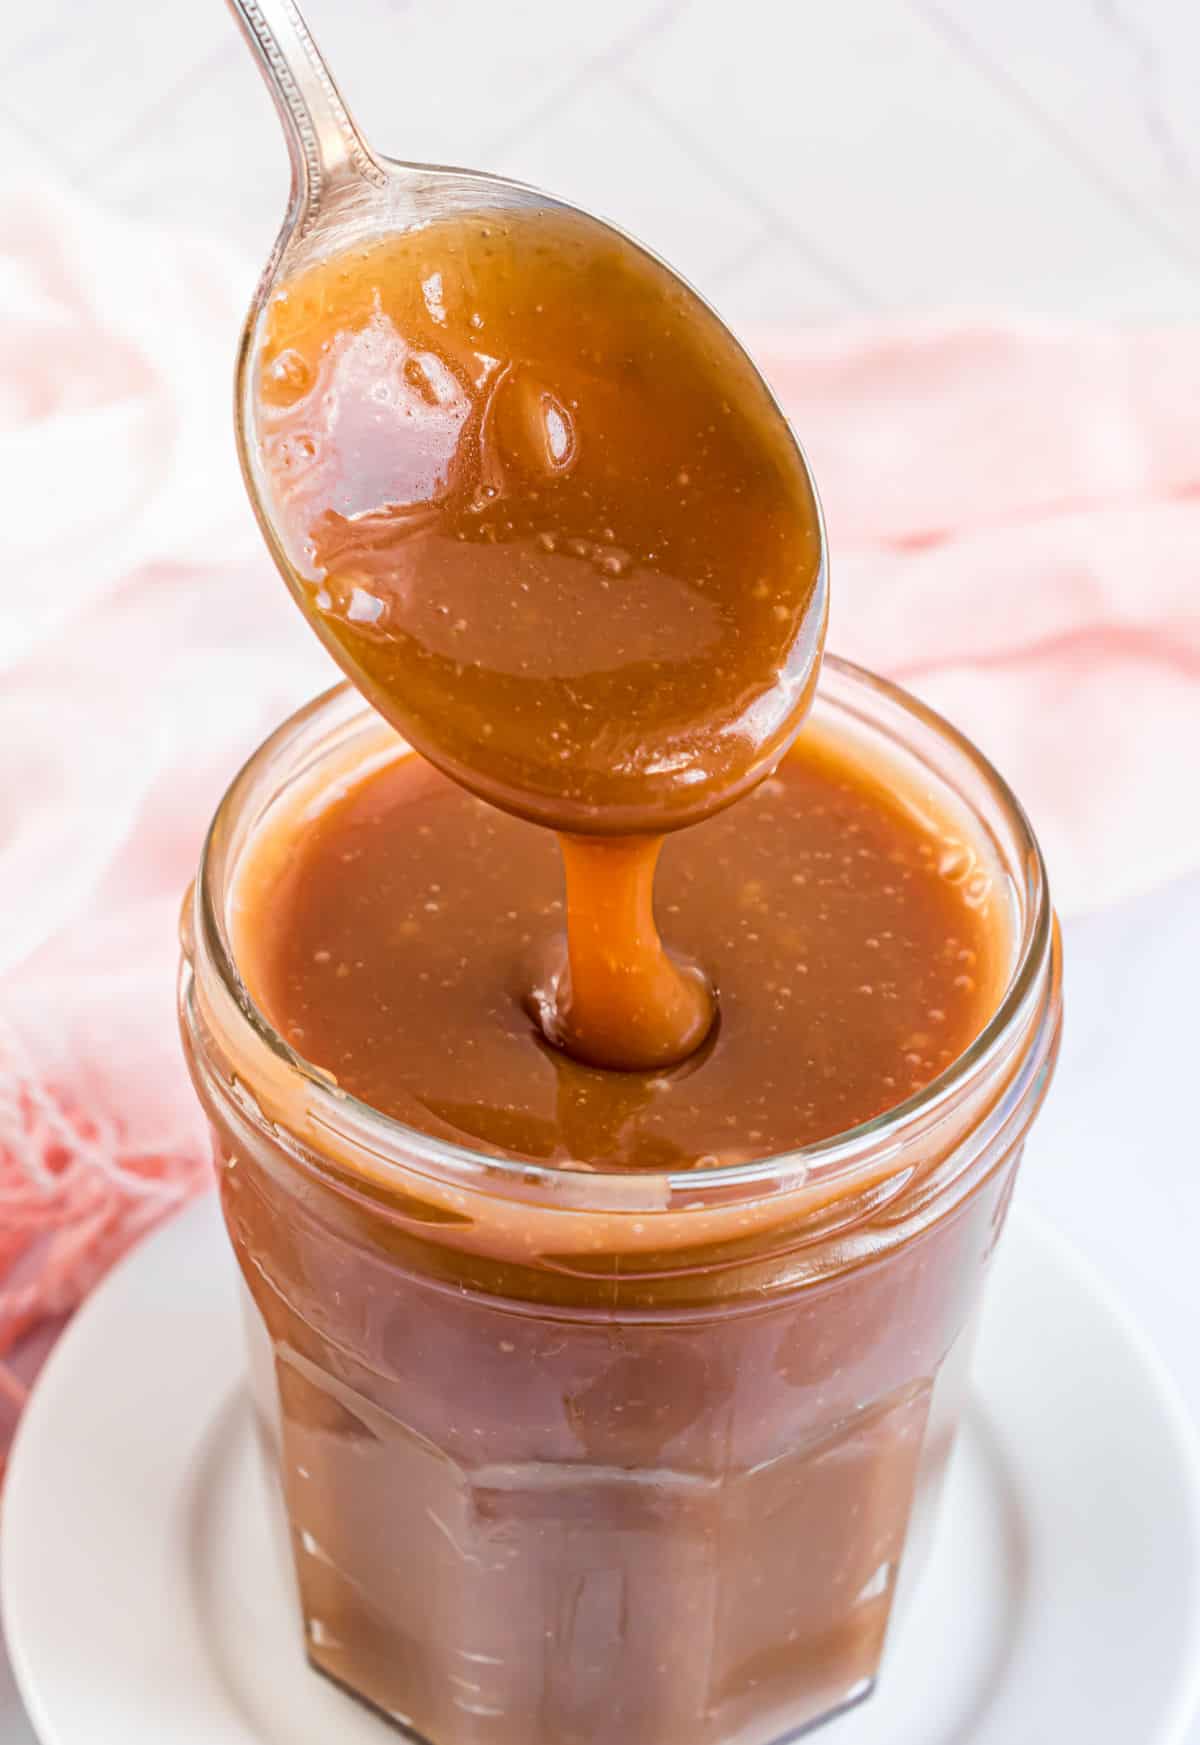 Caramel sauce in a glass jar with a spoon.